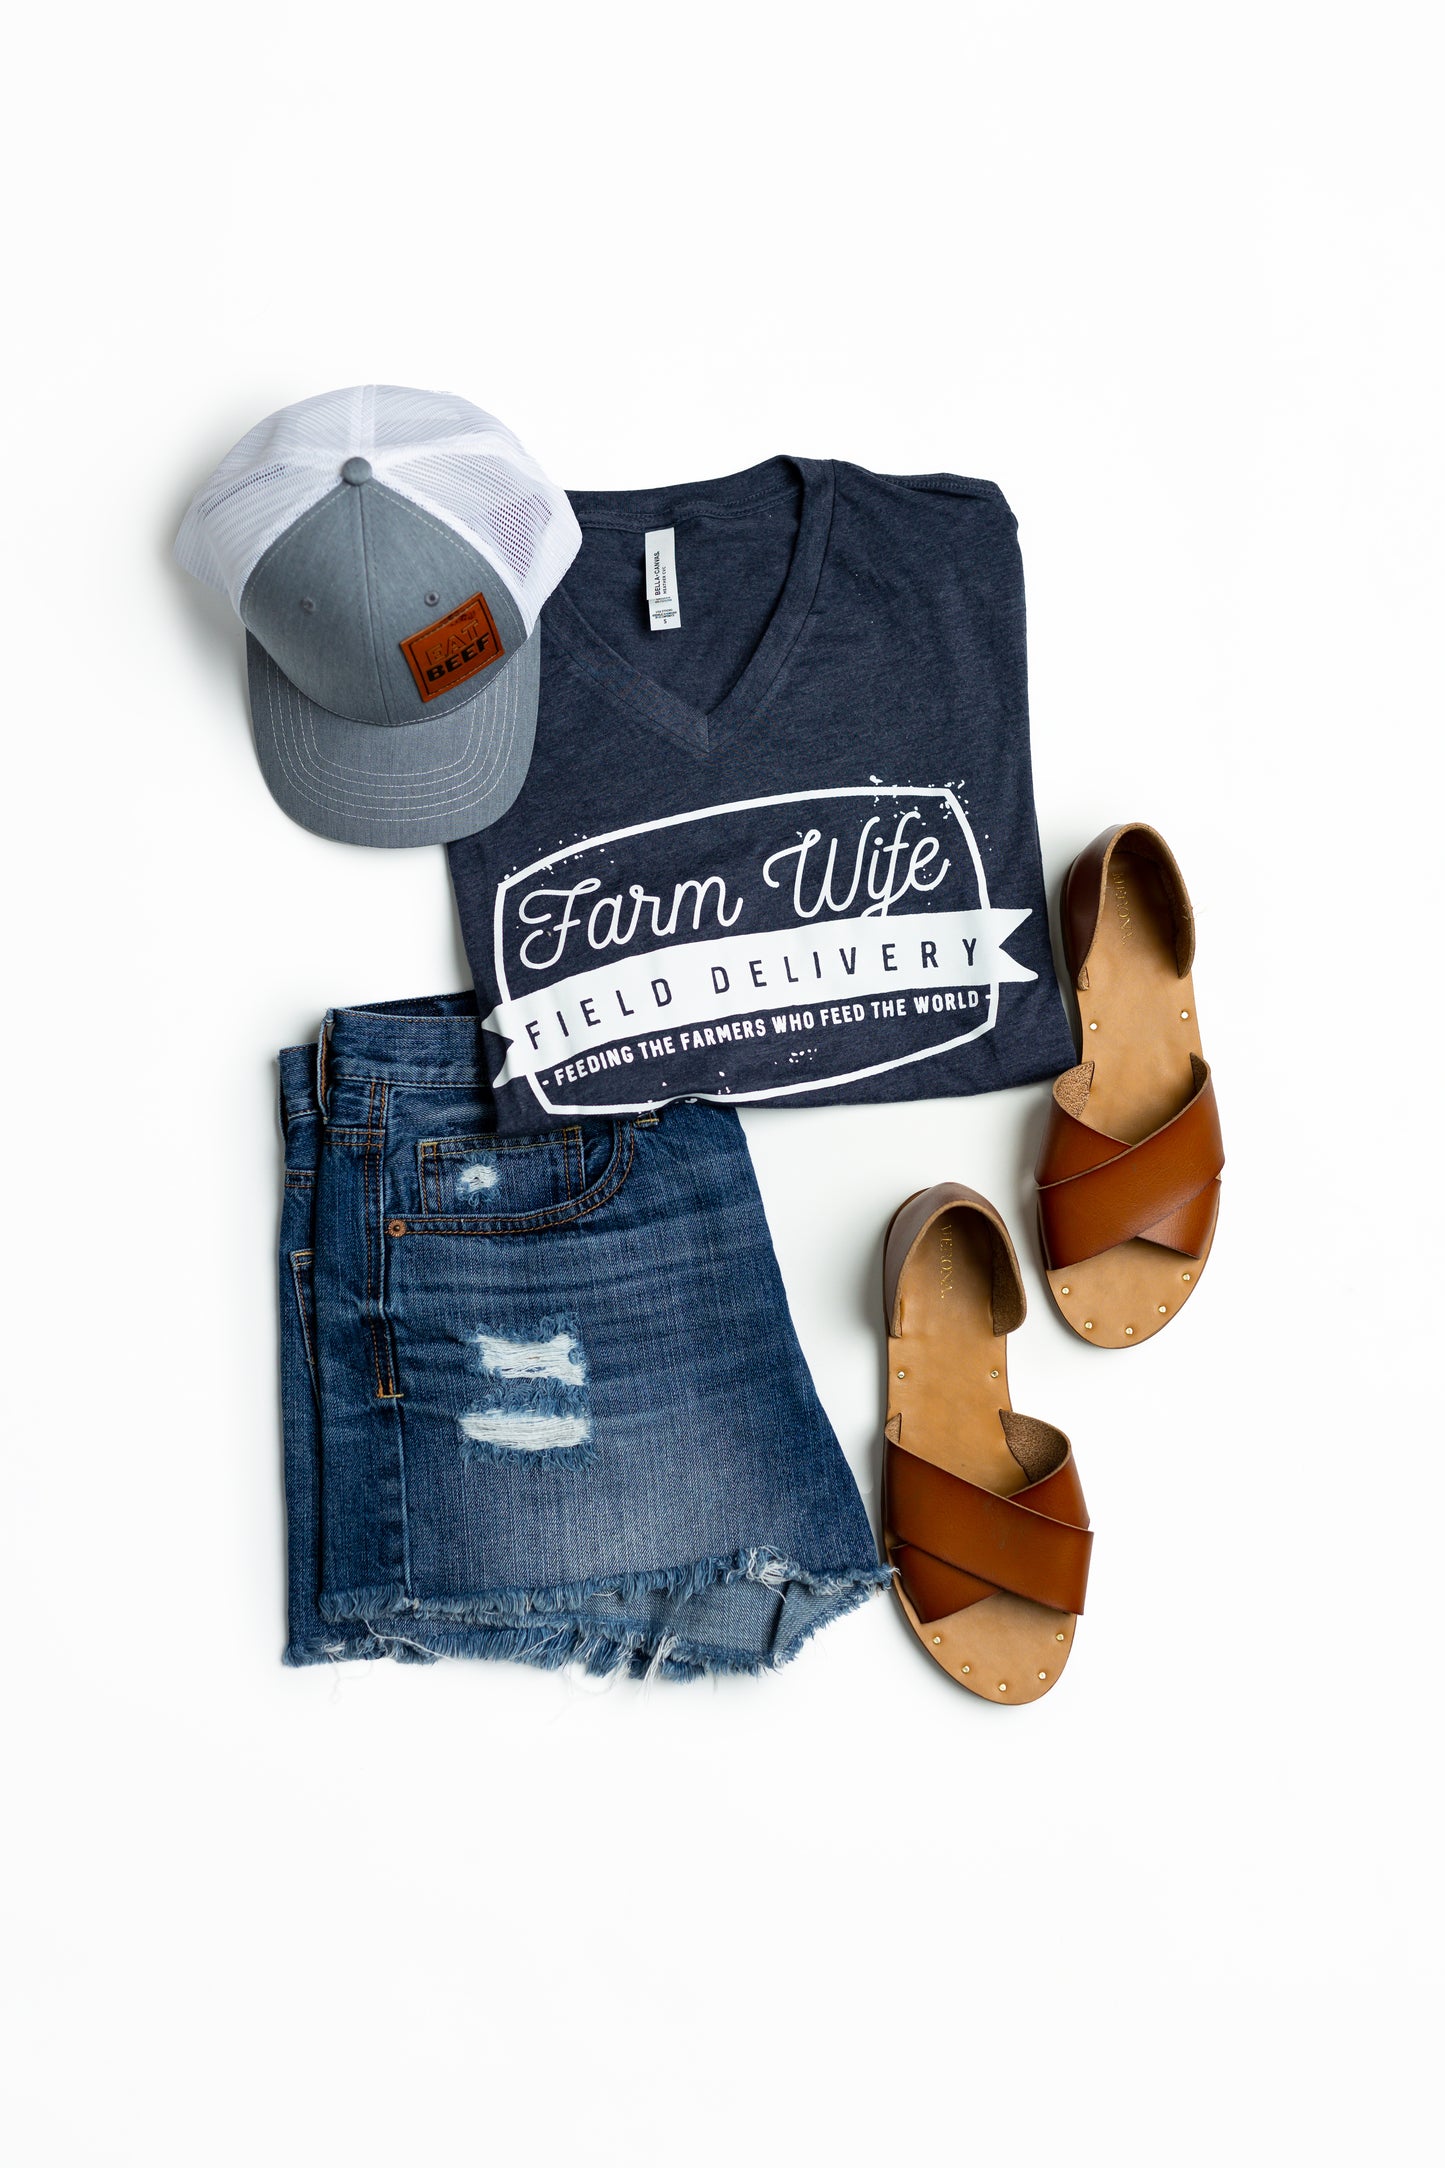 A complete outfit featuring Farm Wife V Neck, a denim short, a grey cap, and brown sandals, creating a casual yet trendy look for a day out